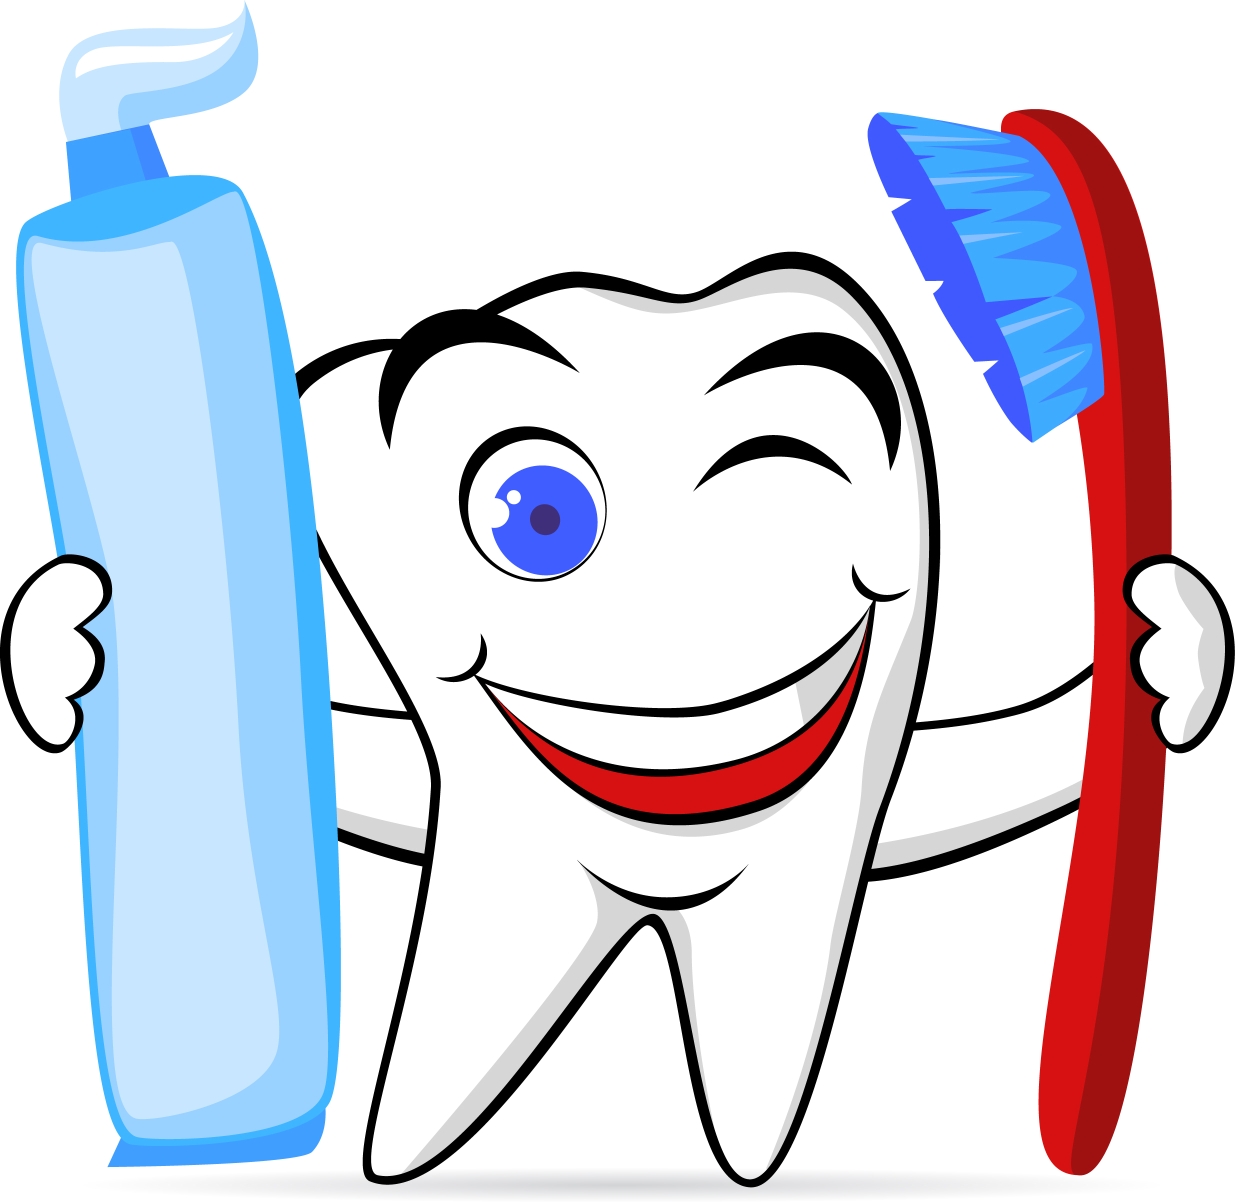 sore tooth clipart - photo #19